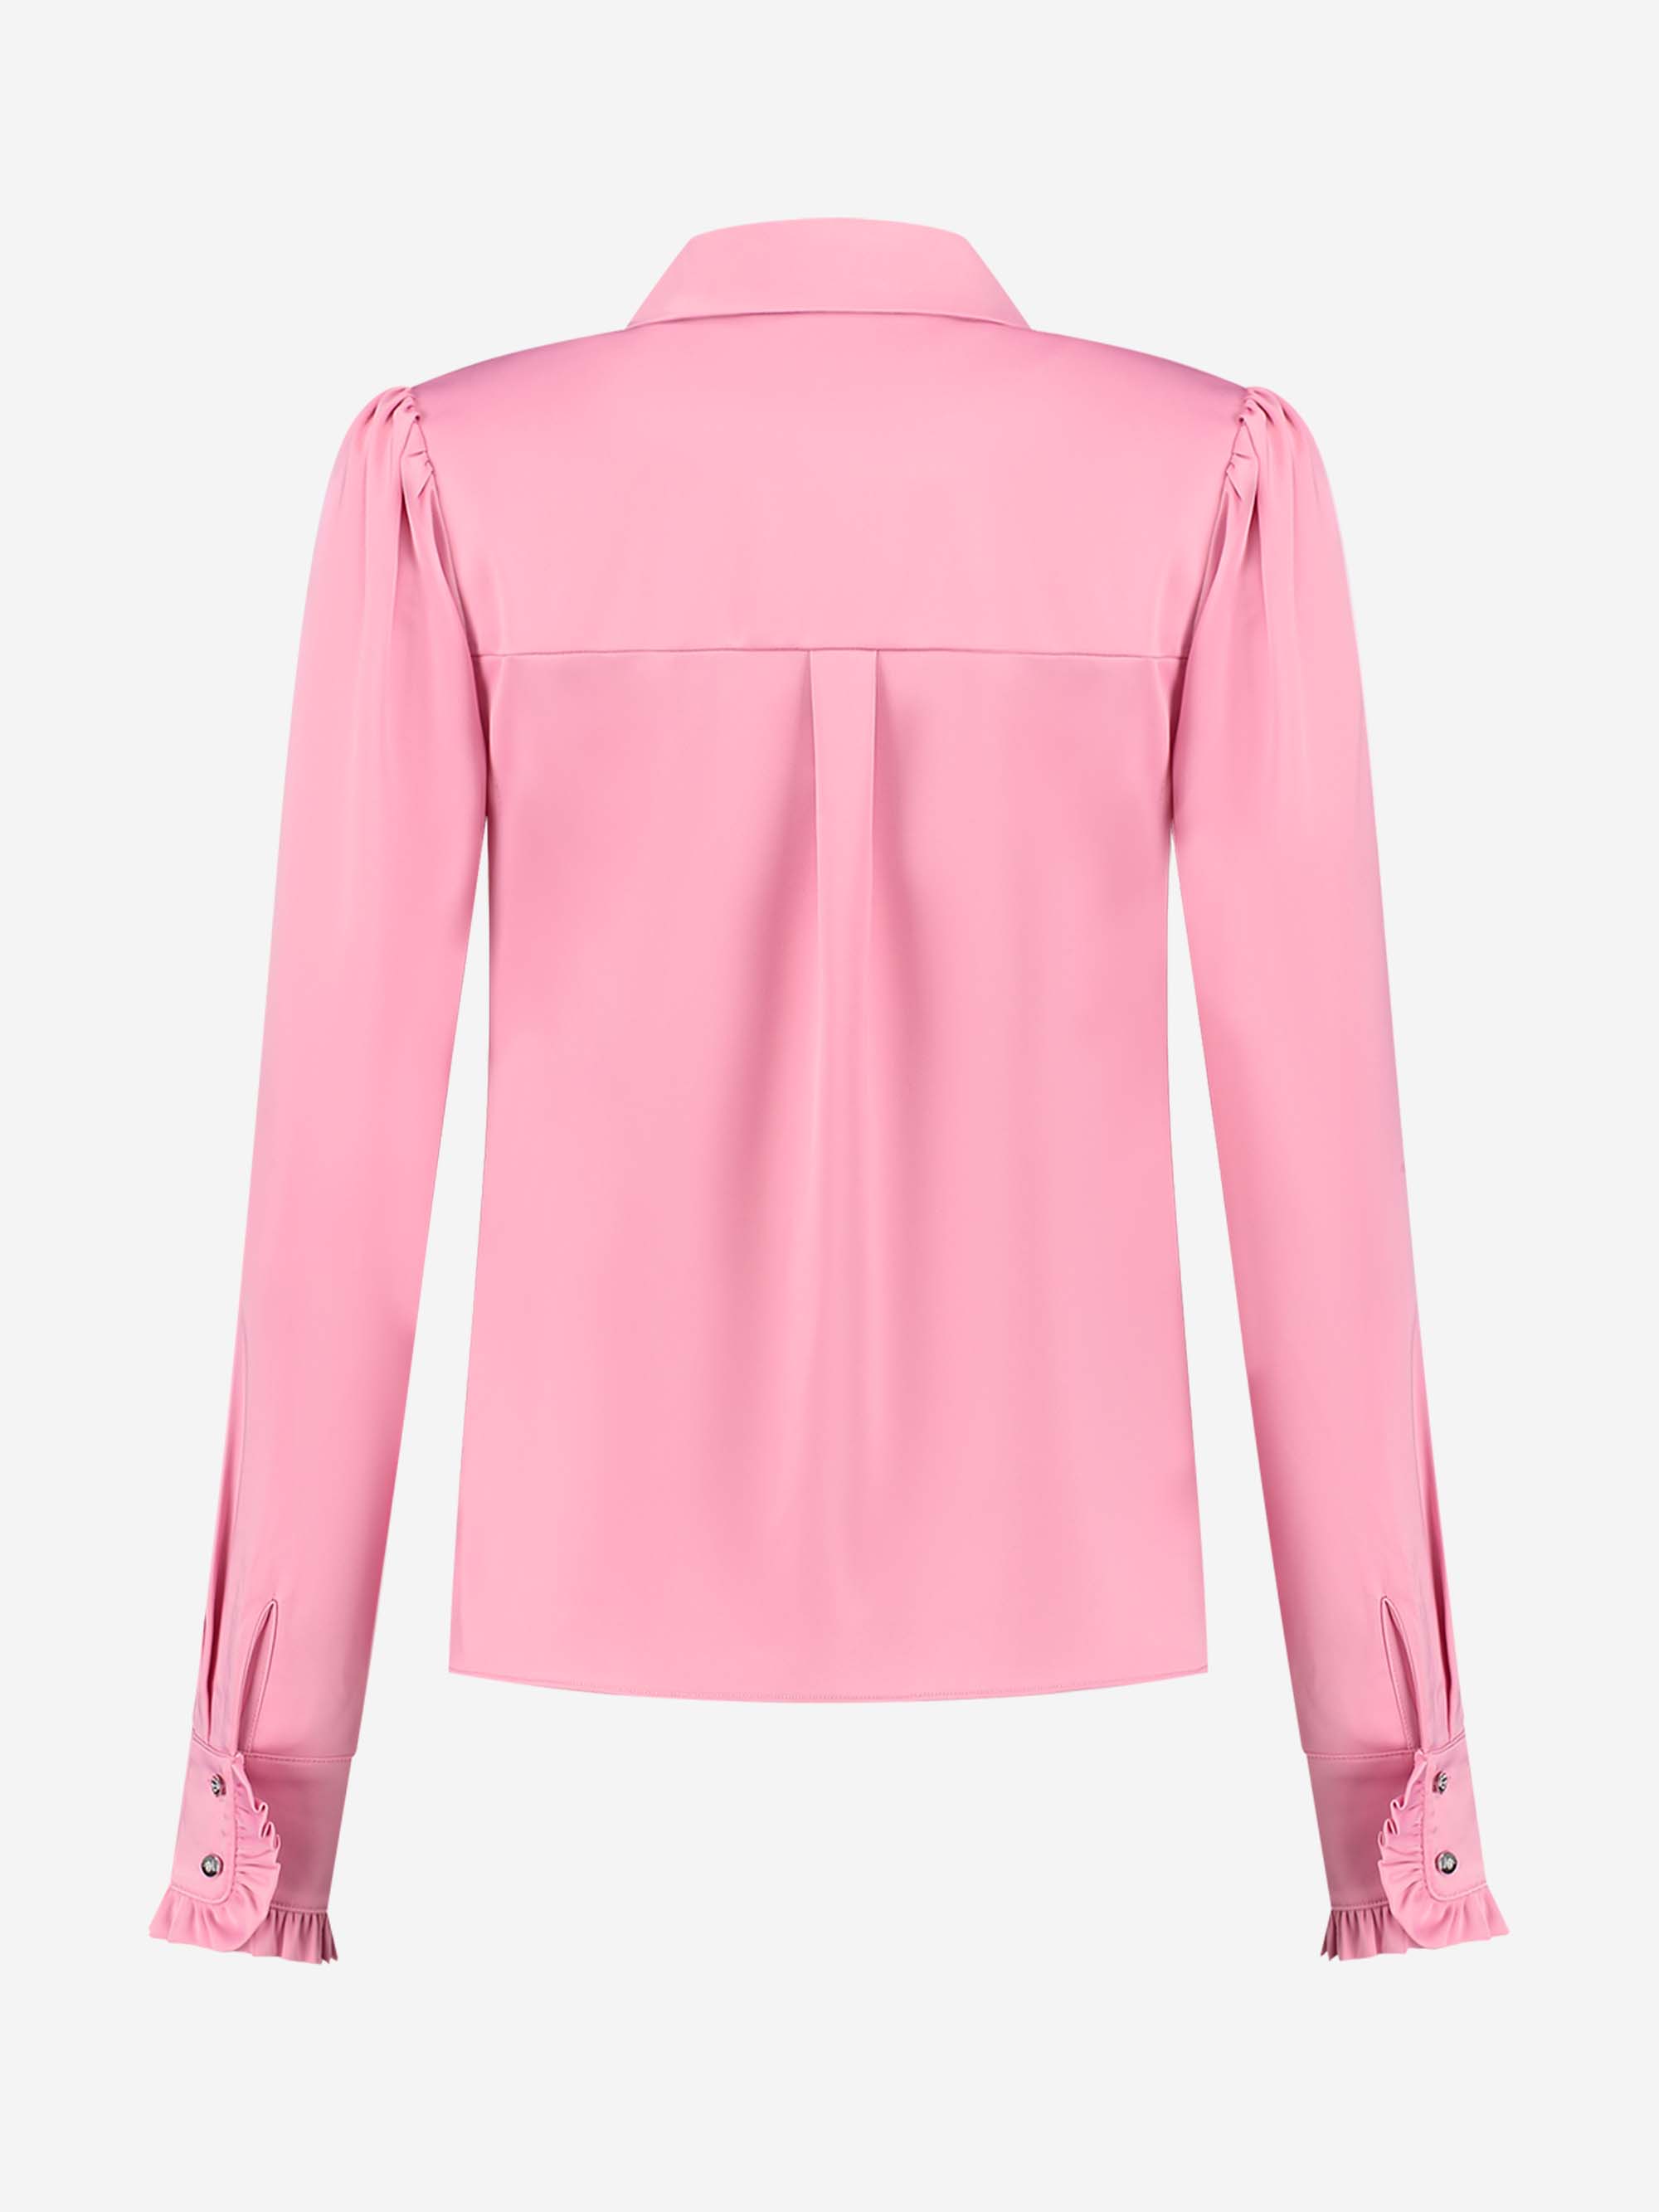 Satin look blouse with ruffles